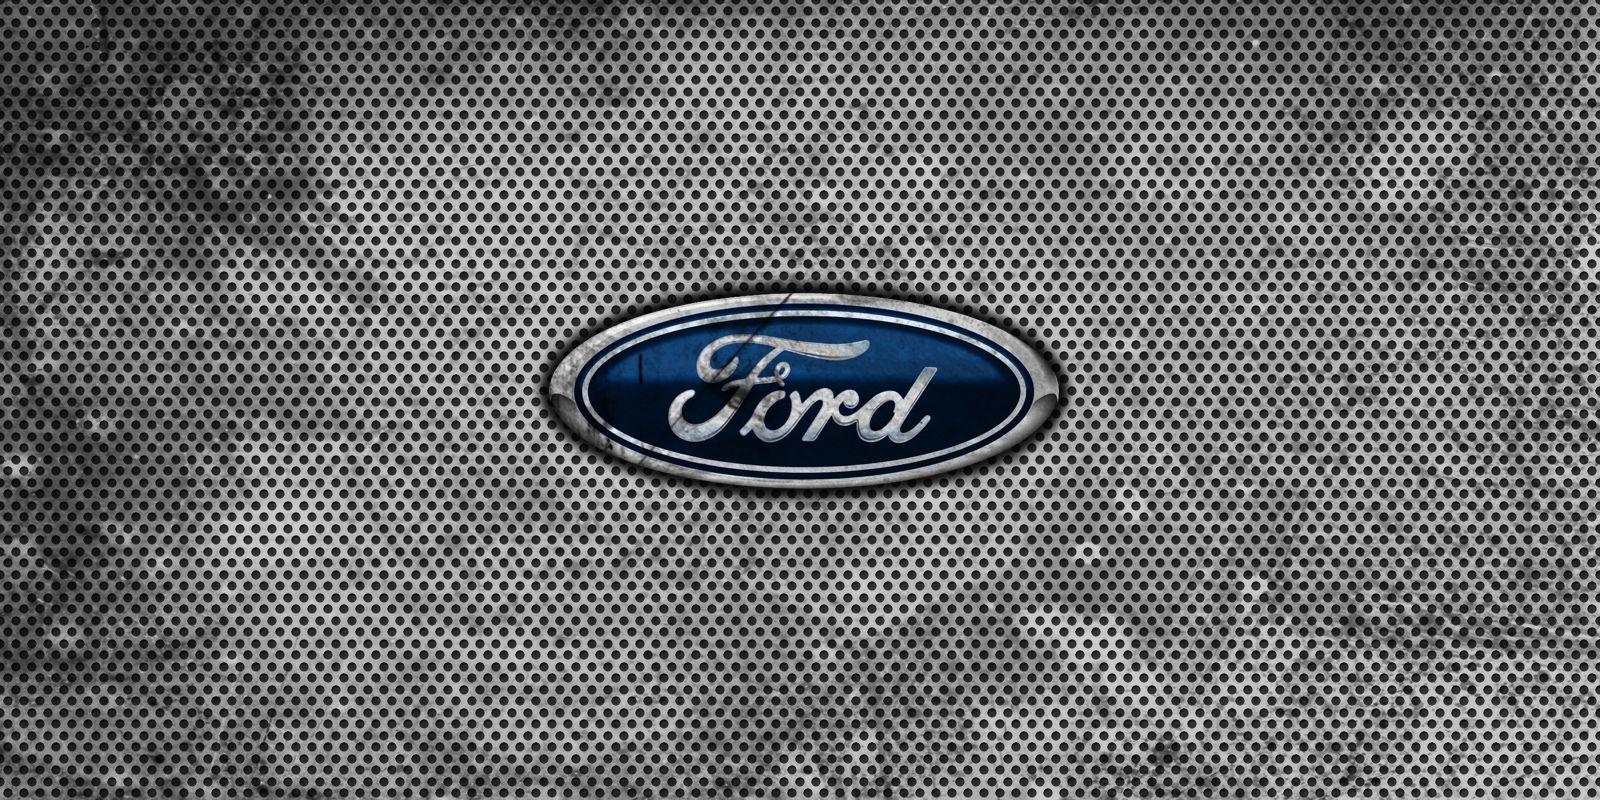 Ford Logo, Ford Car Symbol Meaning and History. Car Brand Names.com